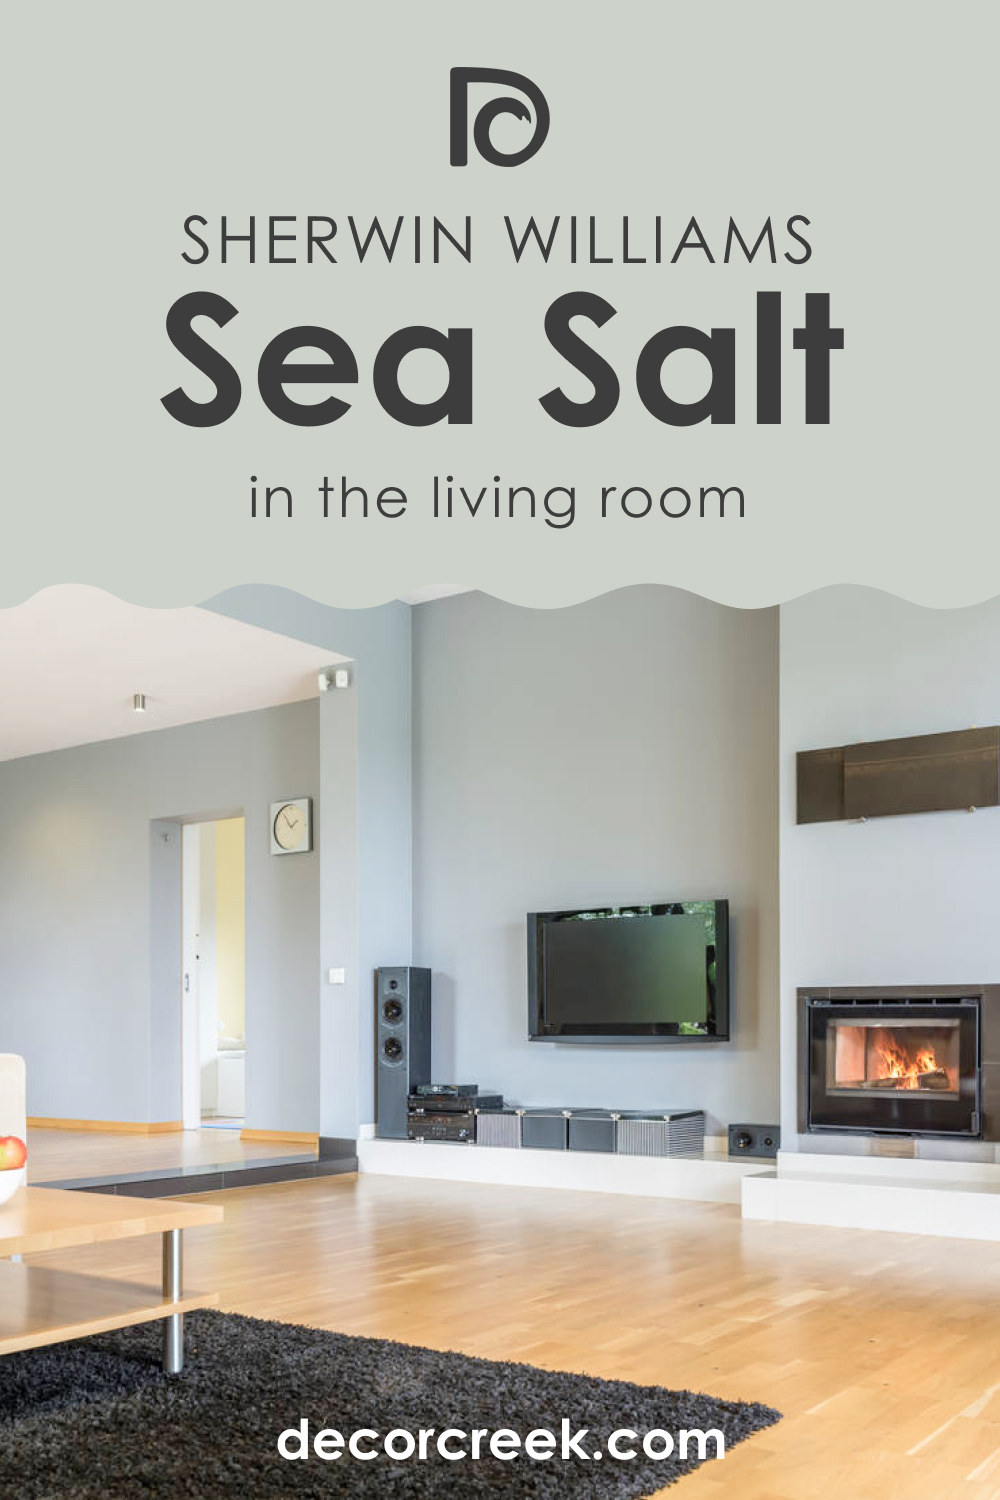 How to Use Sea Salt SW 6204 in the Living Room?